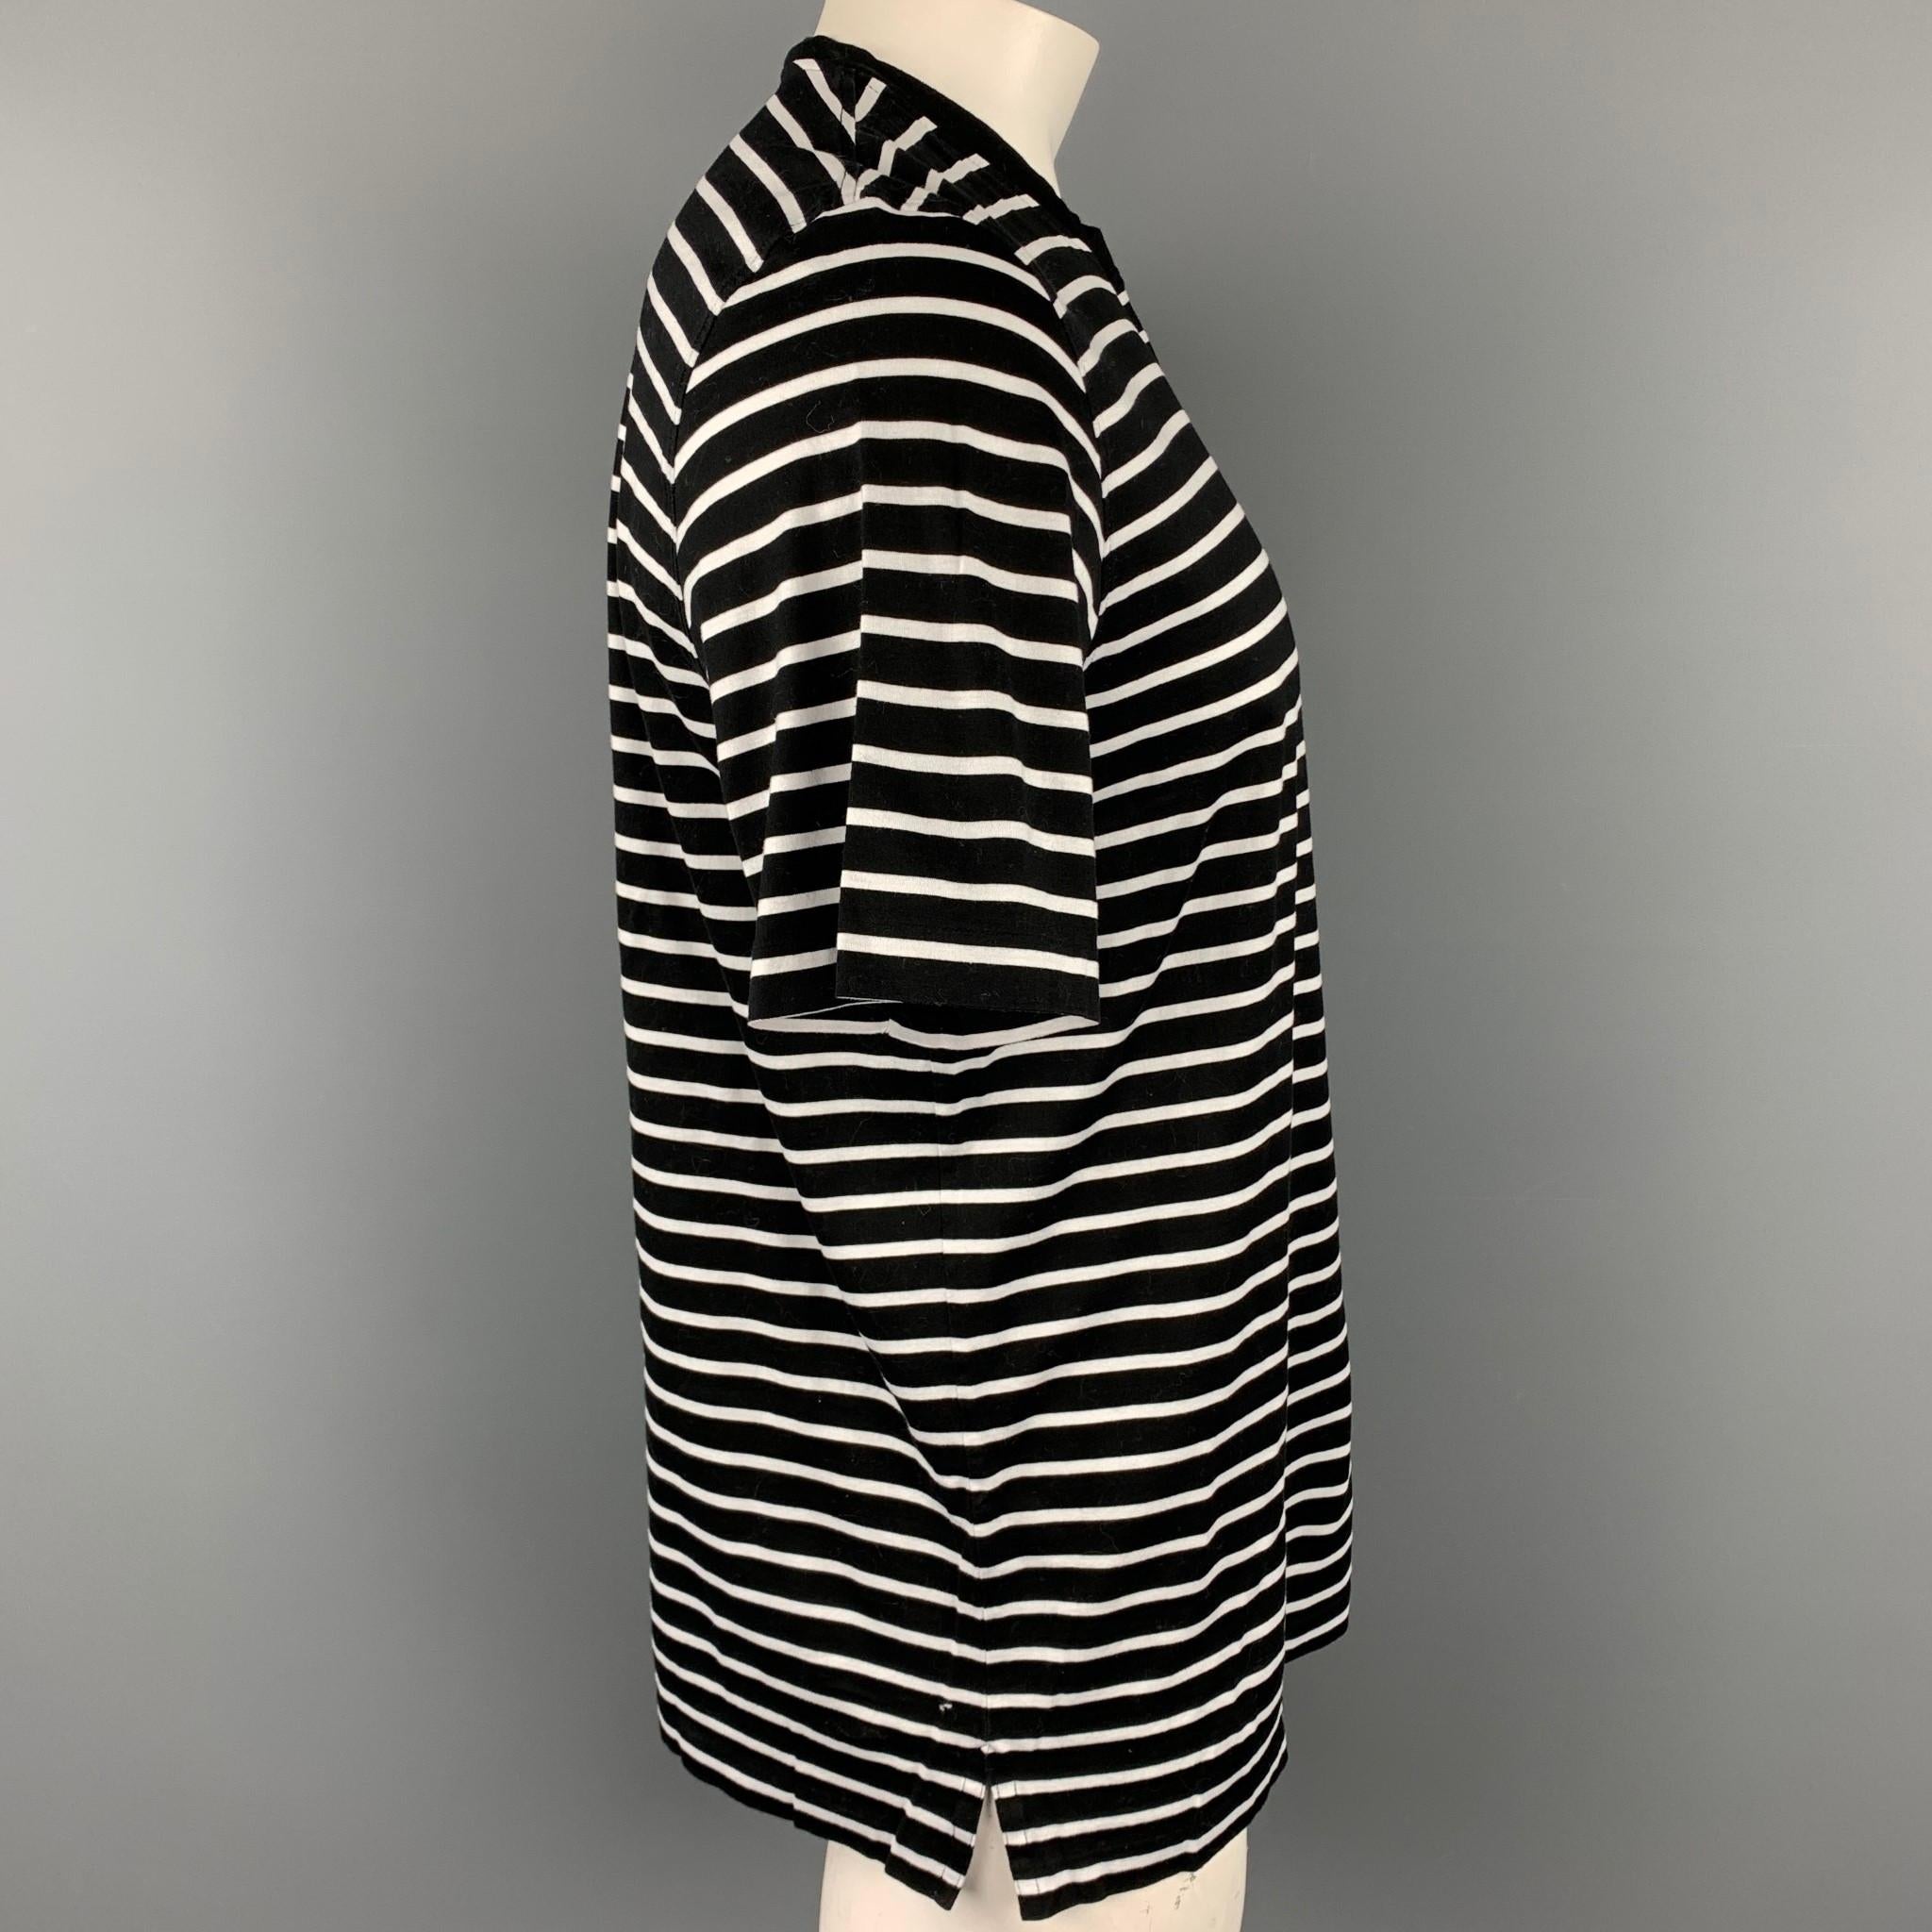 RALPH LAUREN Purple Collection t-shirt comes in a black & white stripe cotton featuring a side slit and  a crew-neck.

Very Good Pre-Owned Condition.
Marked: L

Measurements:

Shoulder: 19 in.
Chest: 42 in.
Sleeve: 11 in.
Length: 29 in. 